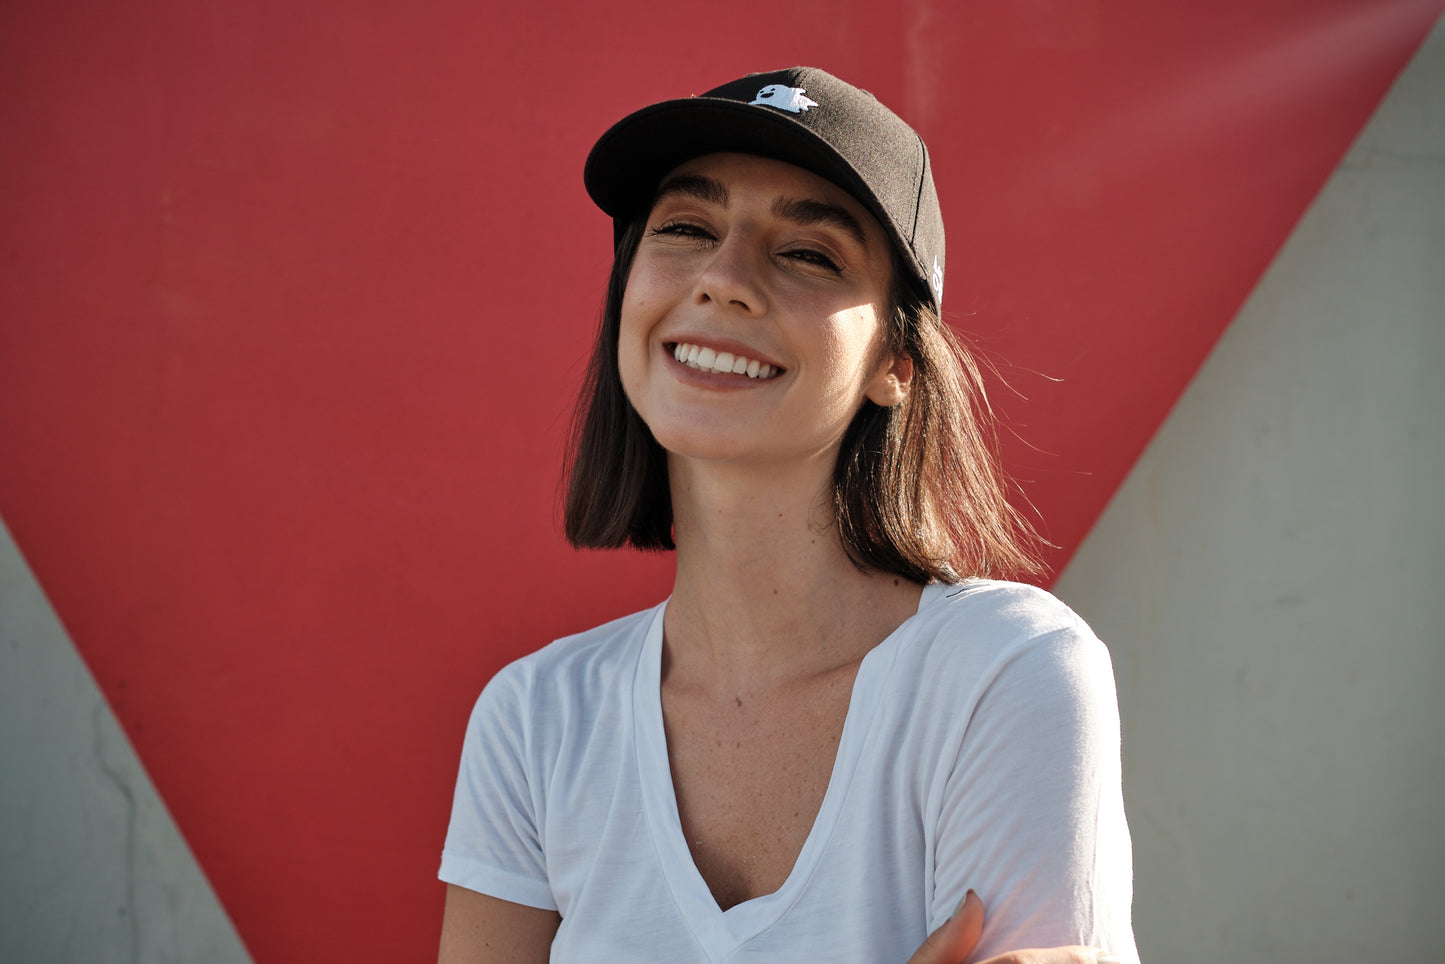 Flying Ghost Space Black Baseball Hat - MOOD Caps model smiley red background